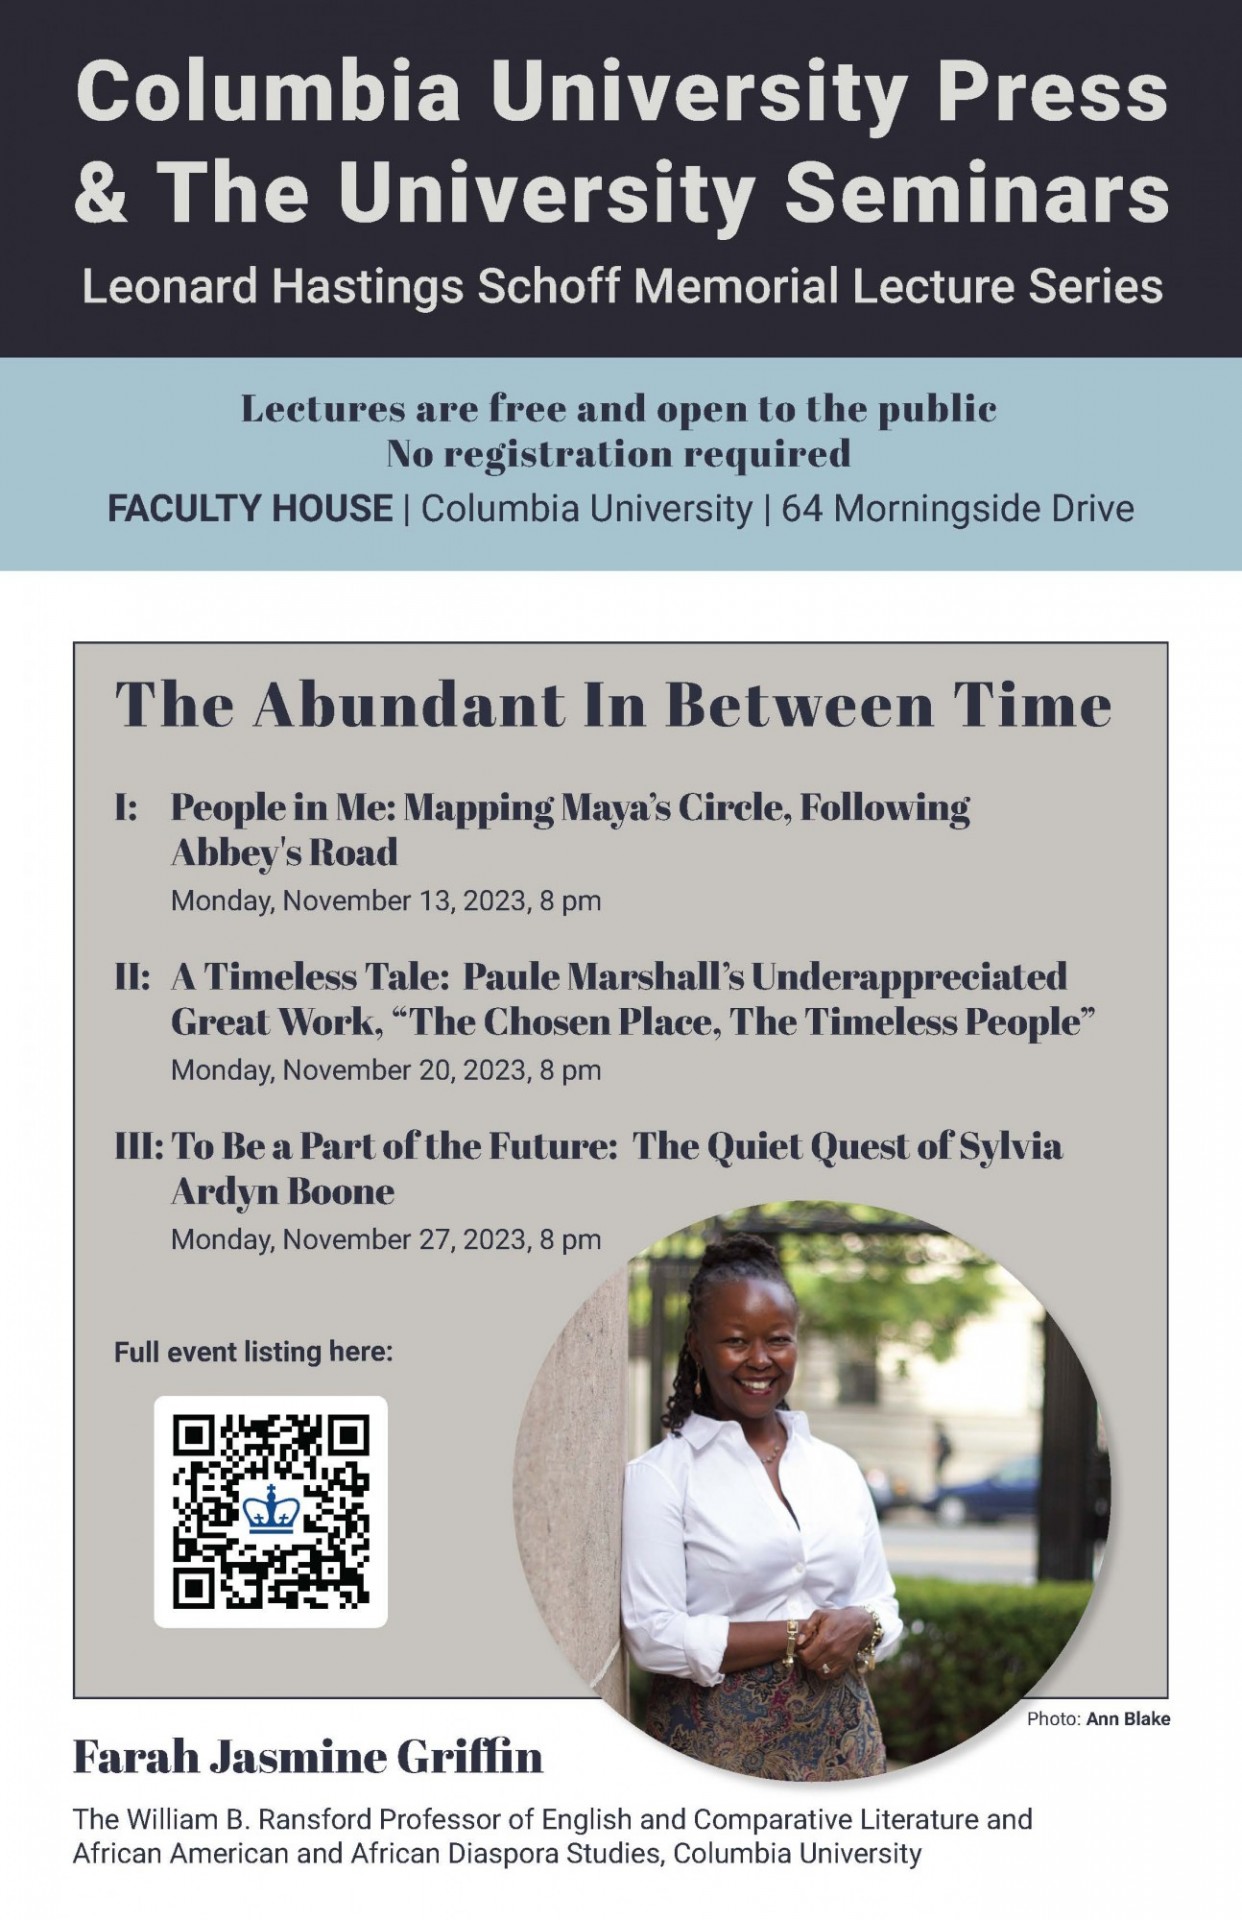 poster for The Abundant In Between Time II:  A Timeless Tale:  Paule Marshall's Underappreciated Great Work, "The Chosen Place, The Timeless People" 